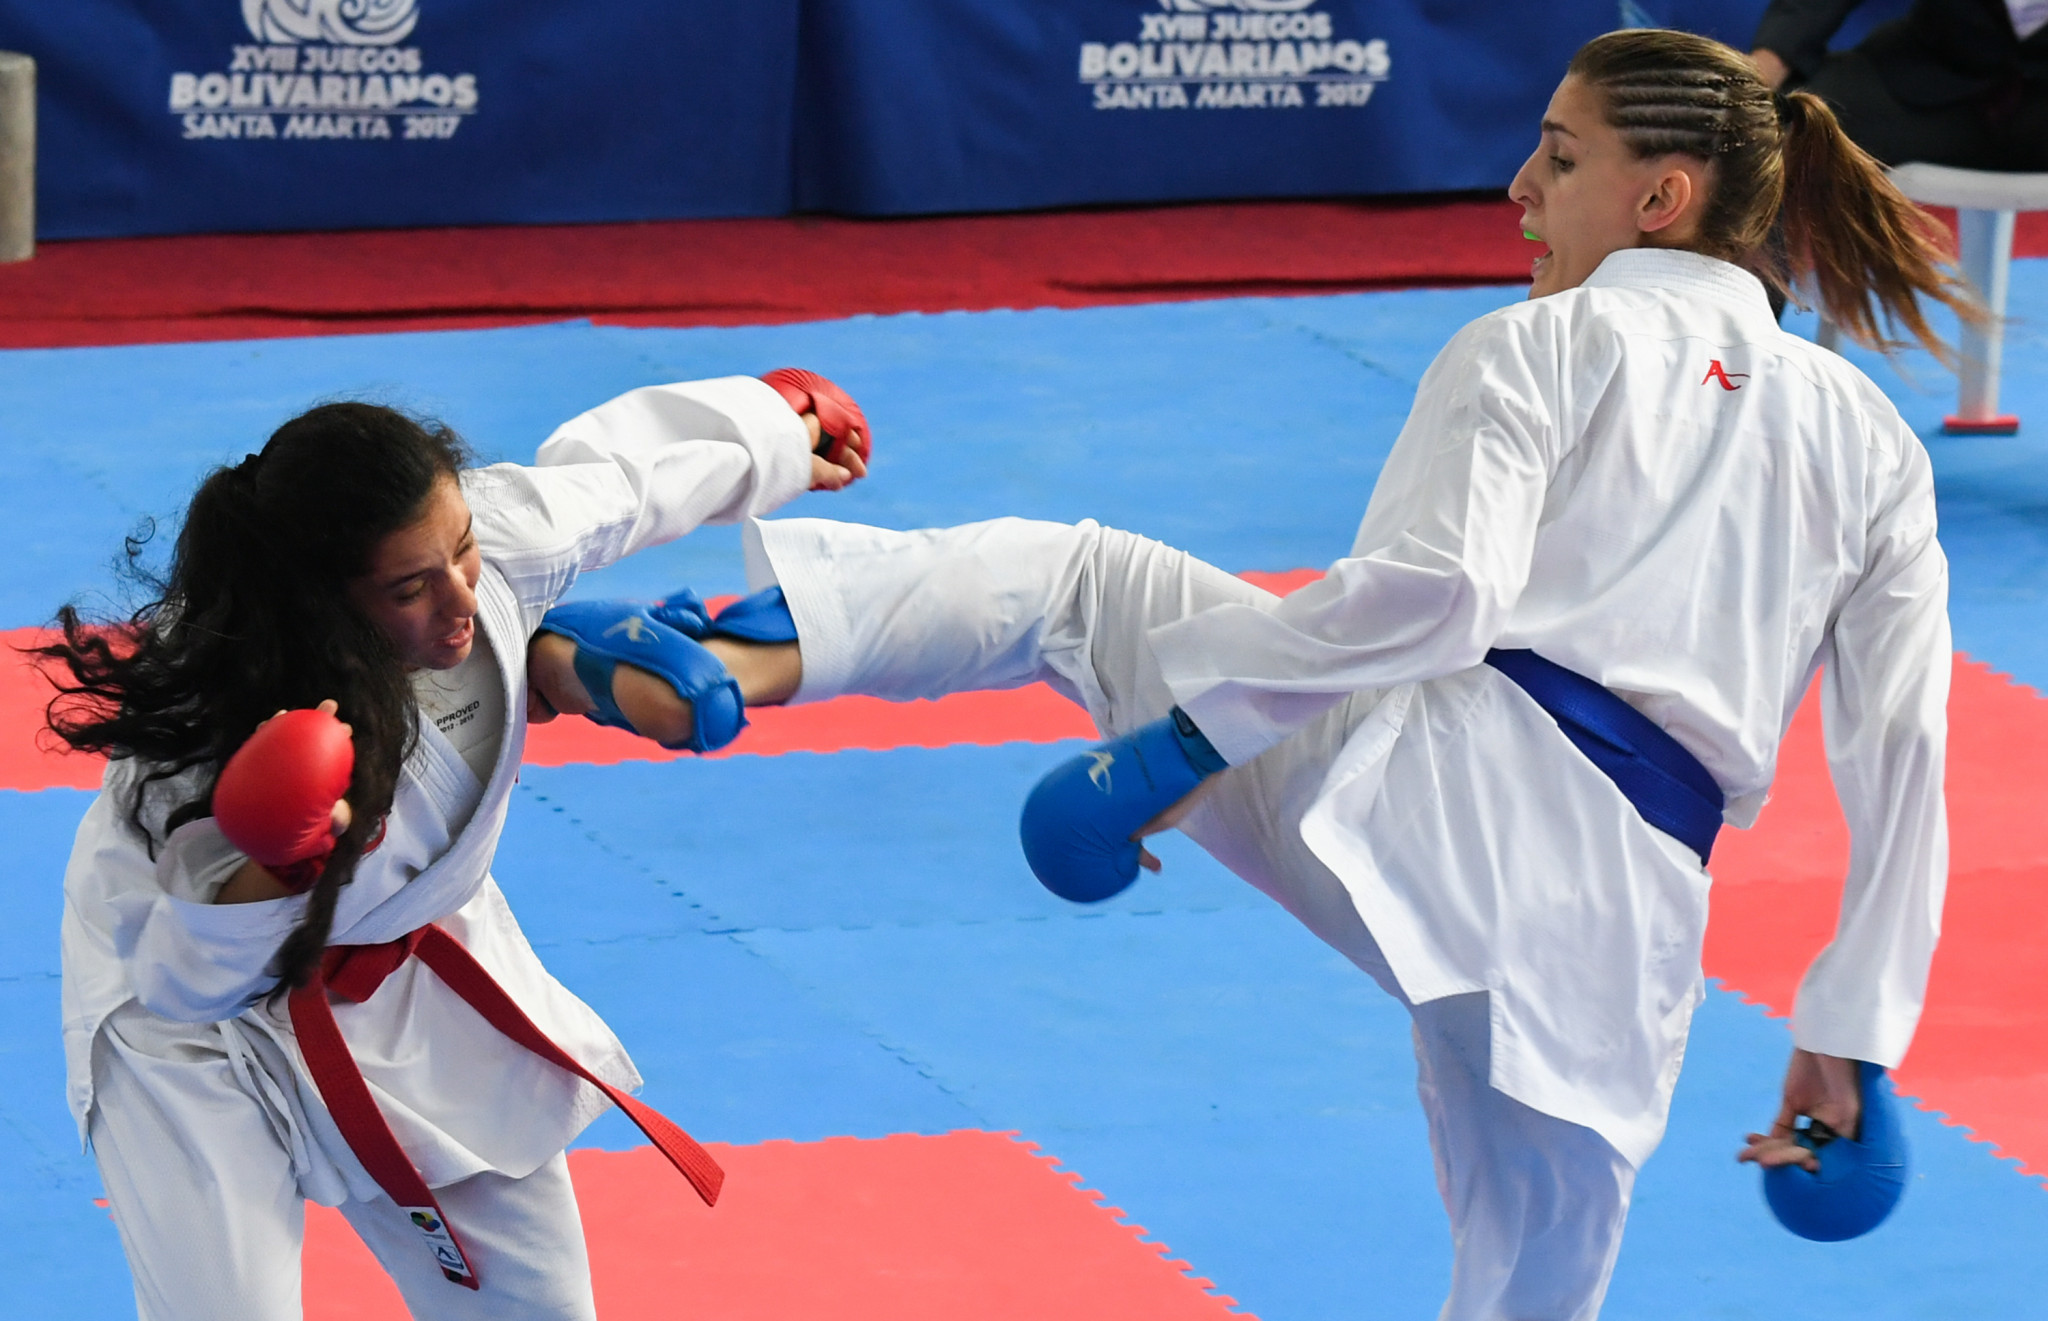 Canada And Venezuela Win Team Kumite Events On Final Day Of Pan American Karate Federation